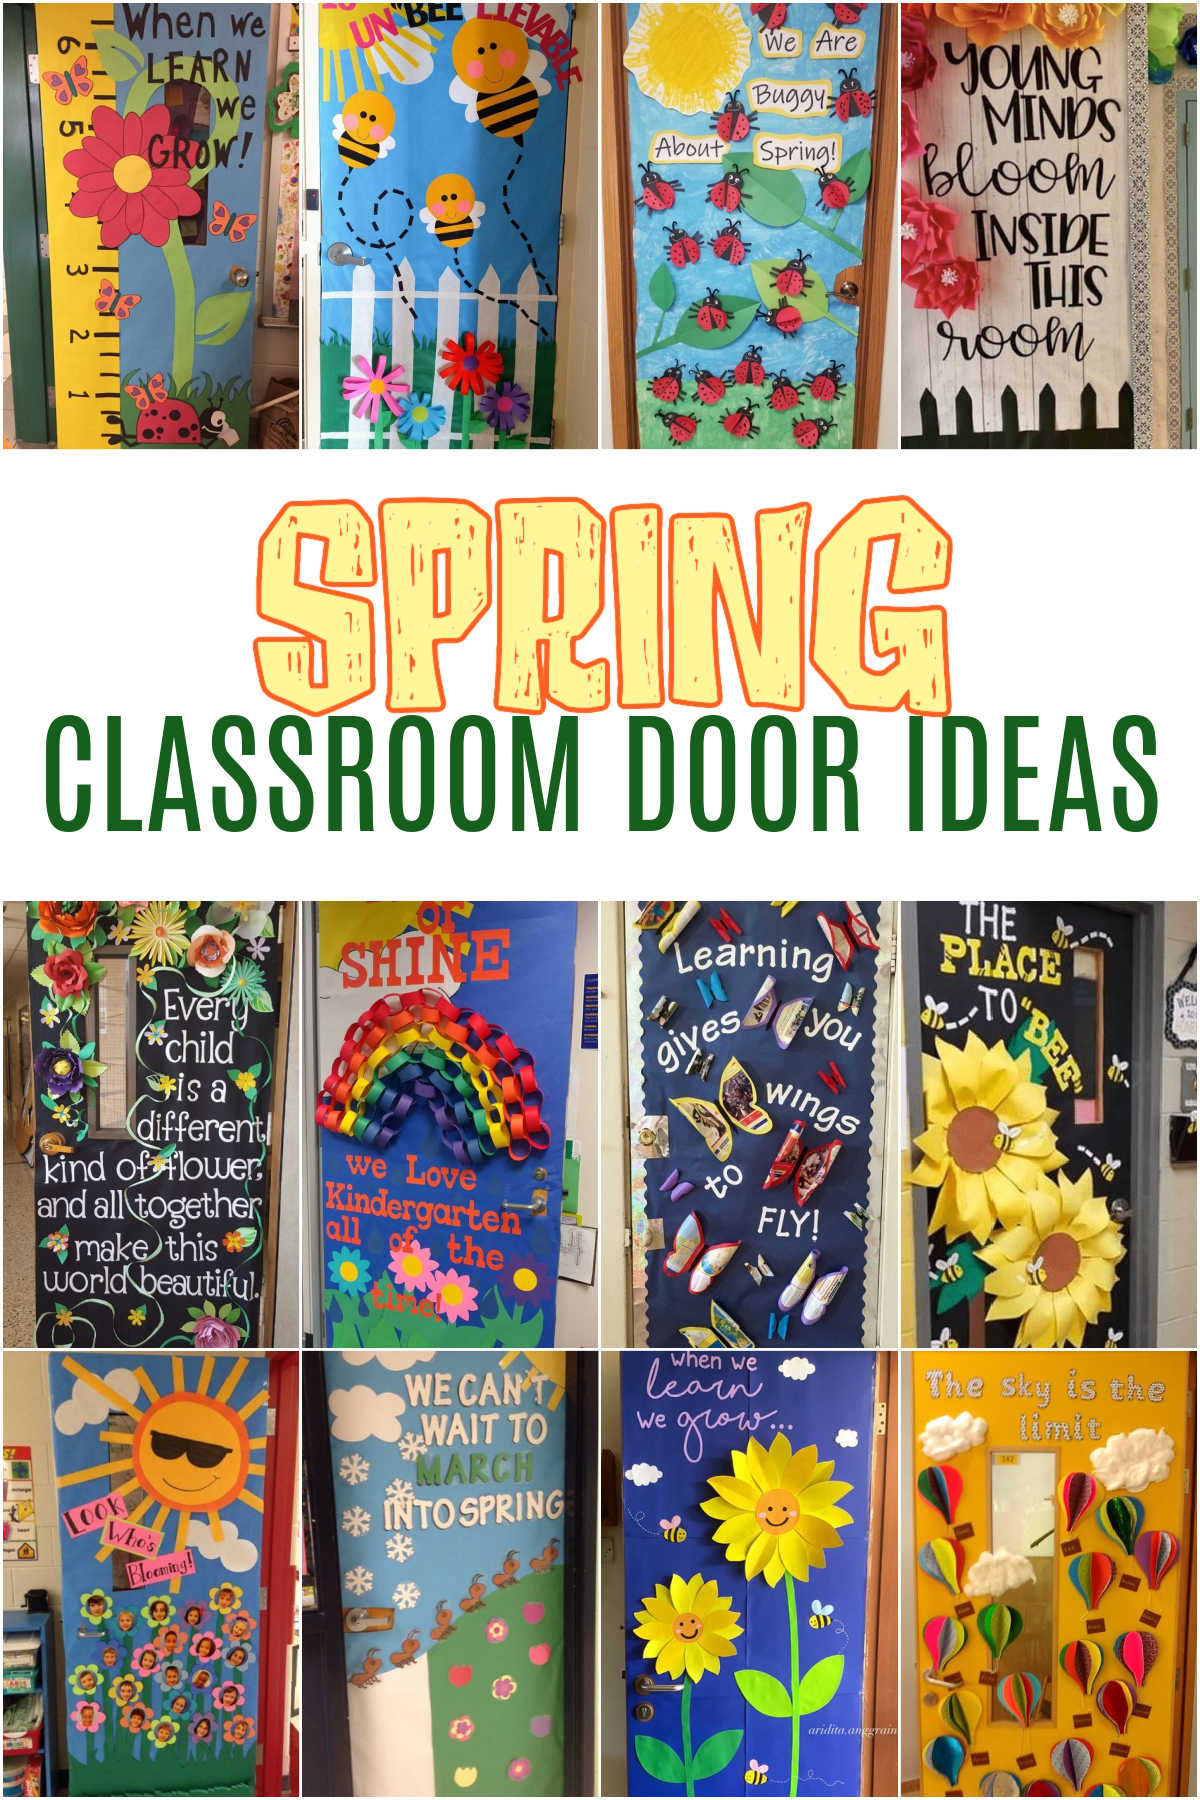 Collage of Classroom Door Ideas for Spring